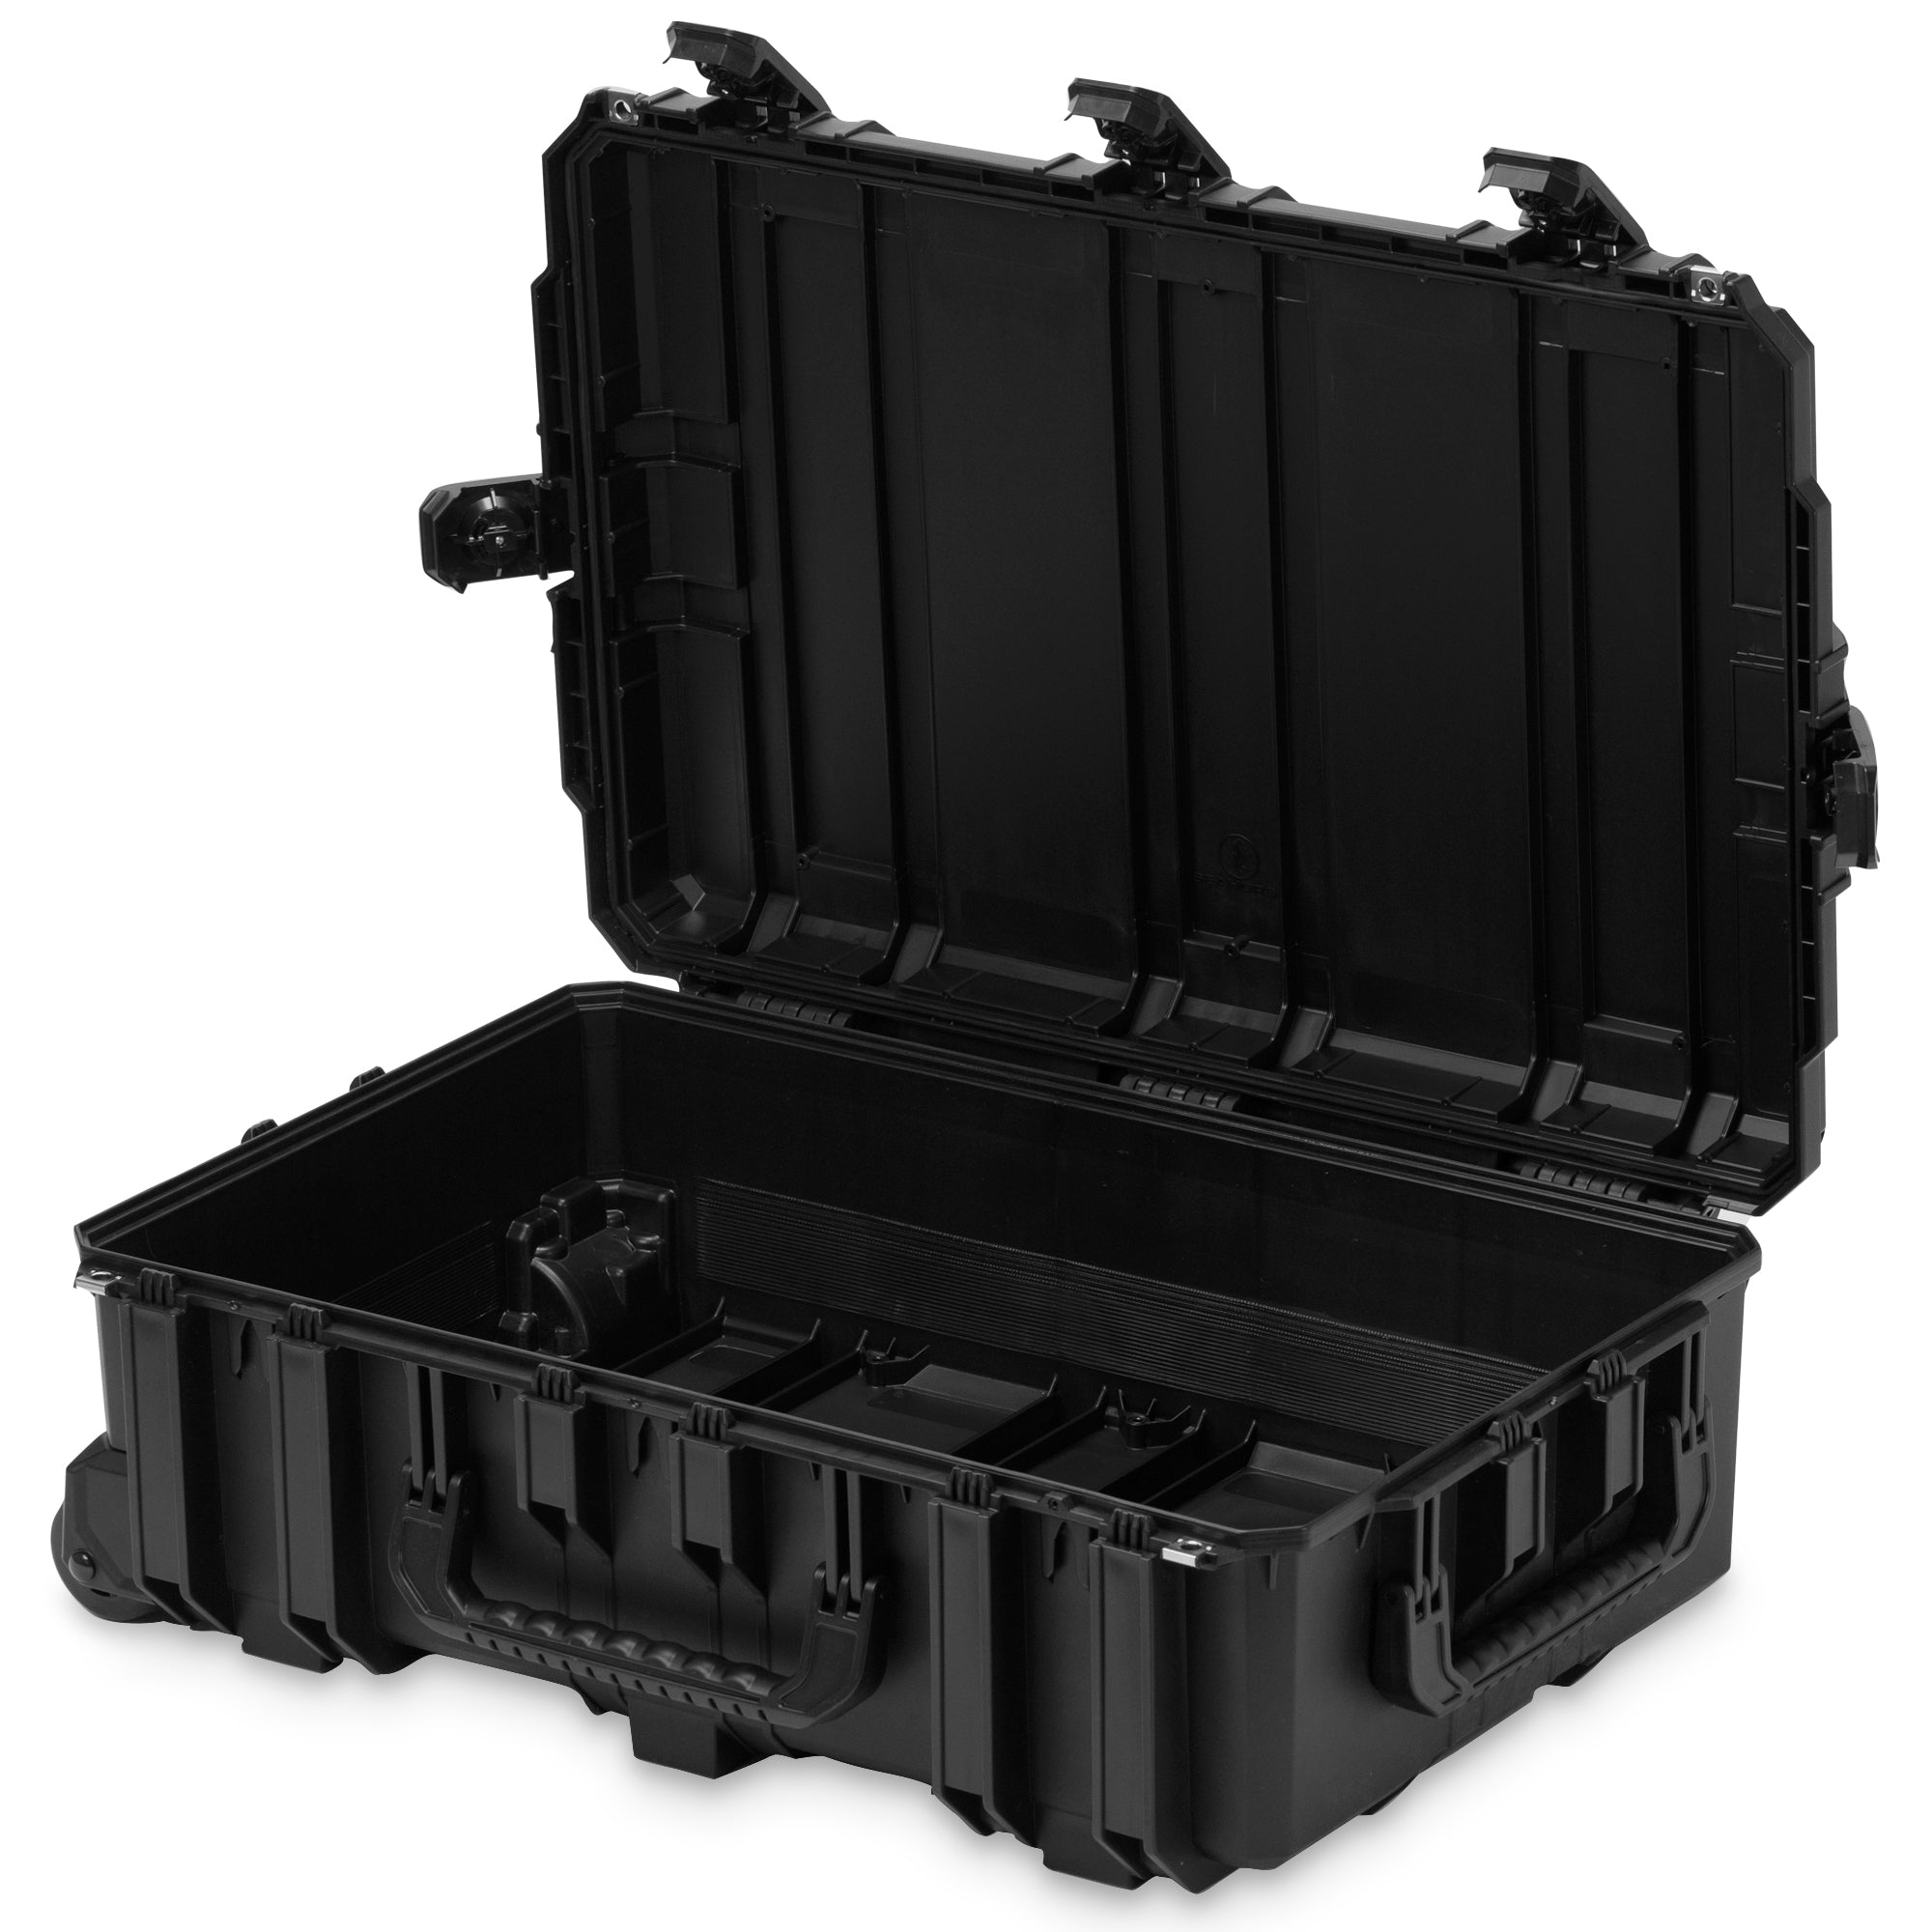 New Seahorse Arrivals Cases – Official